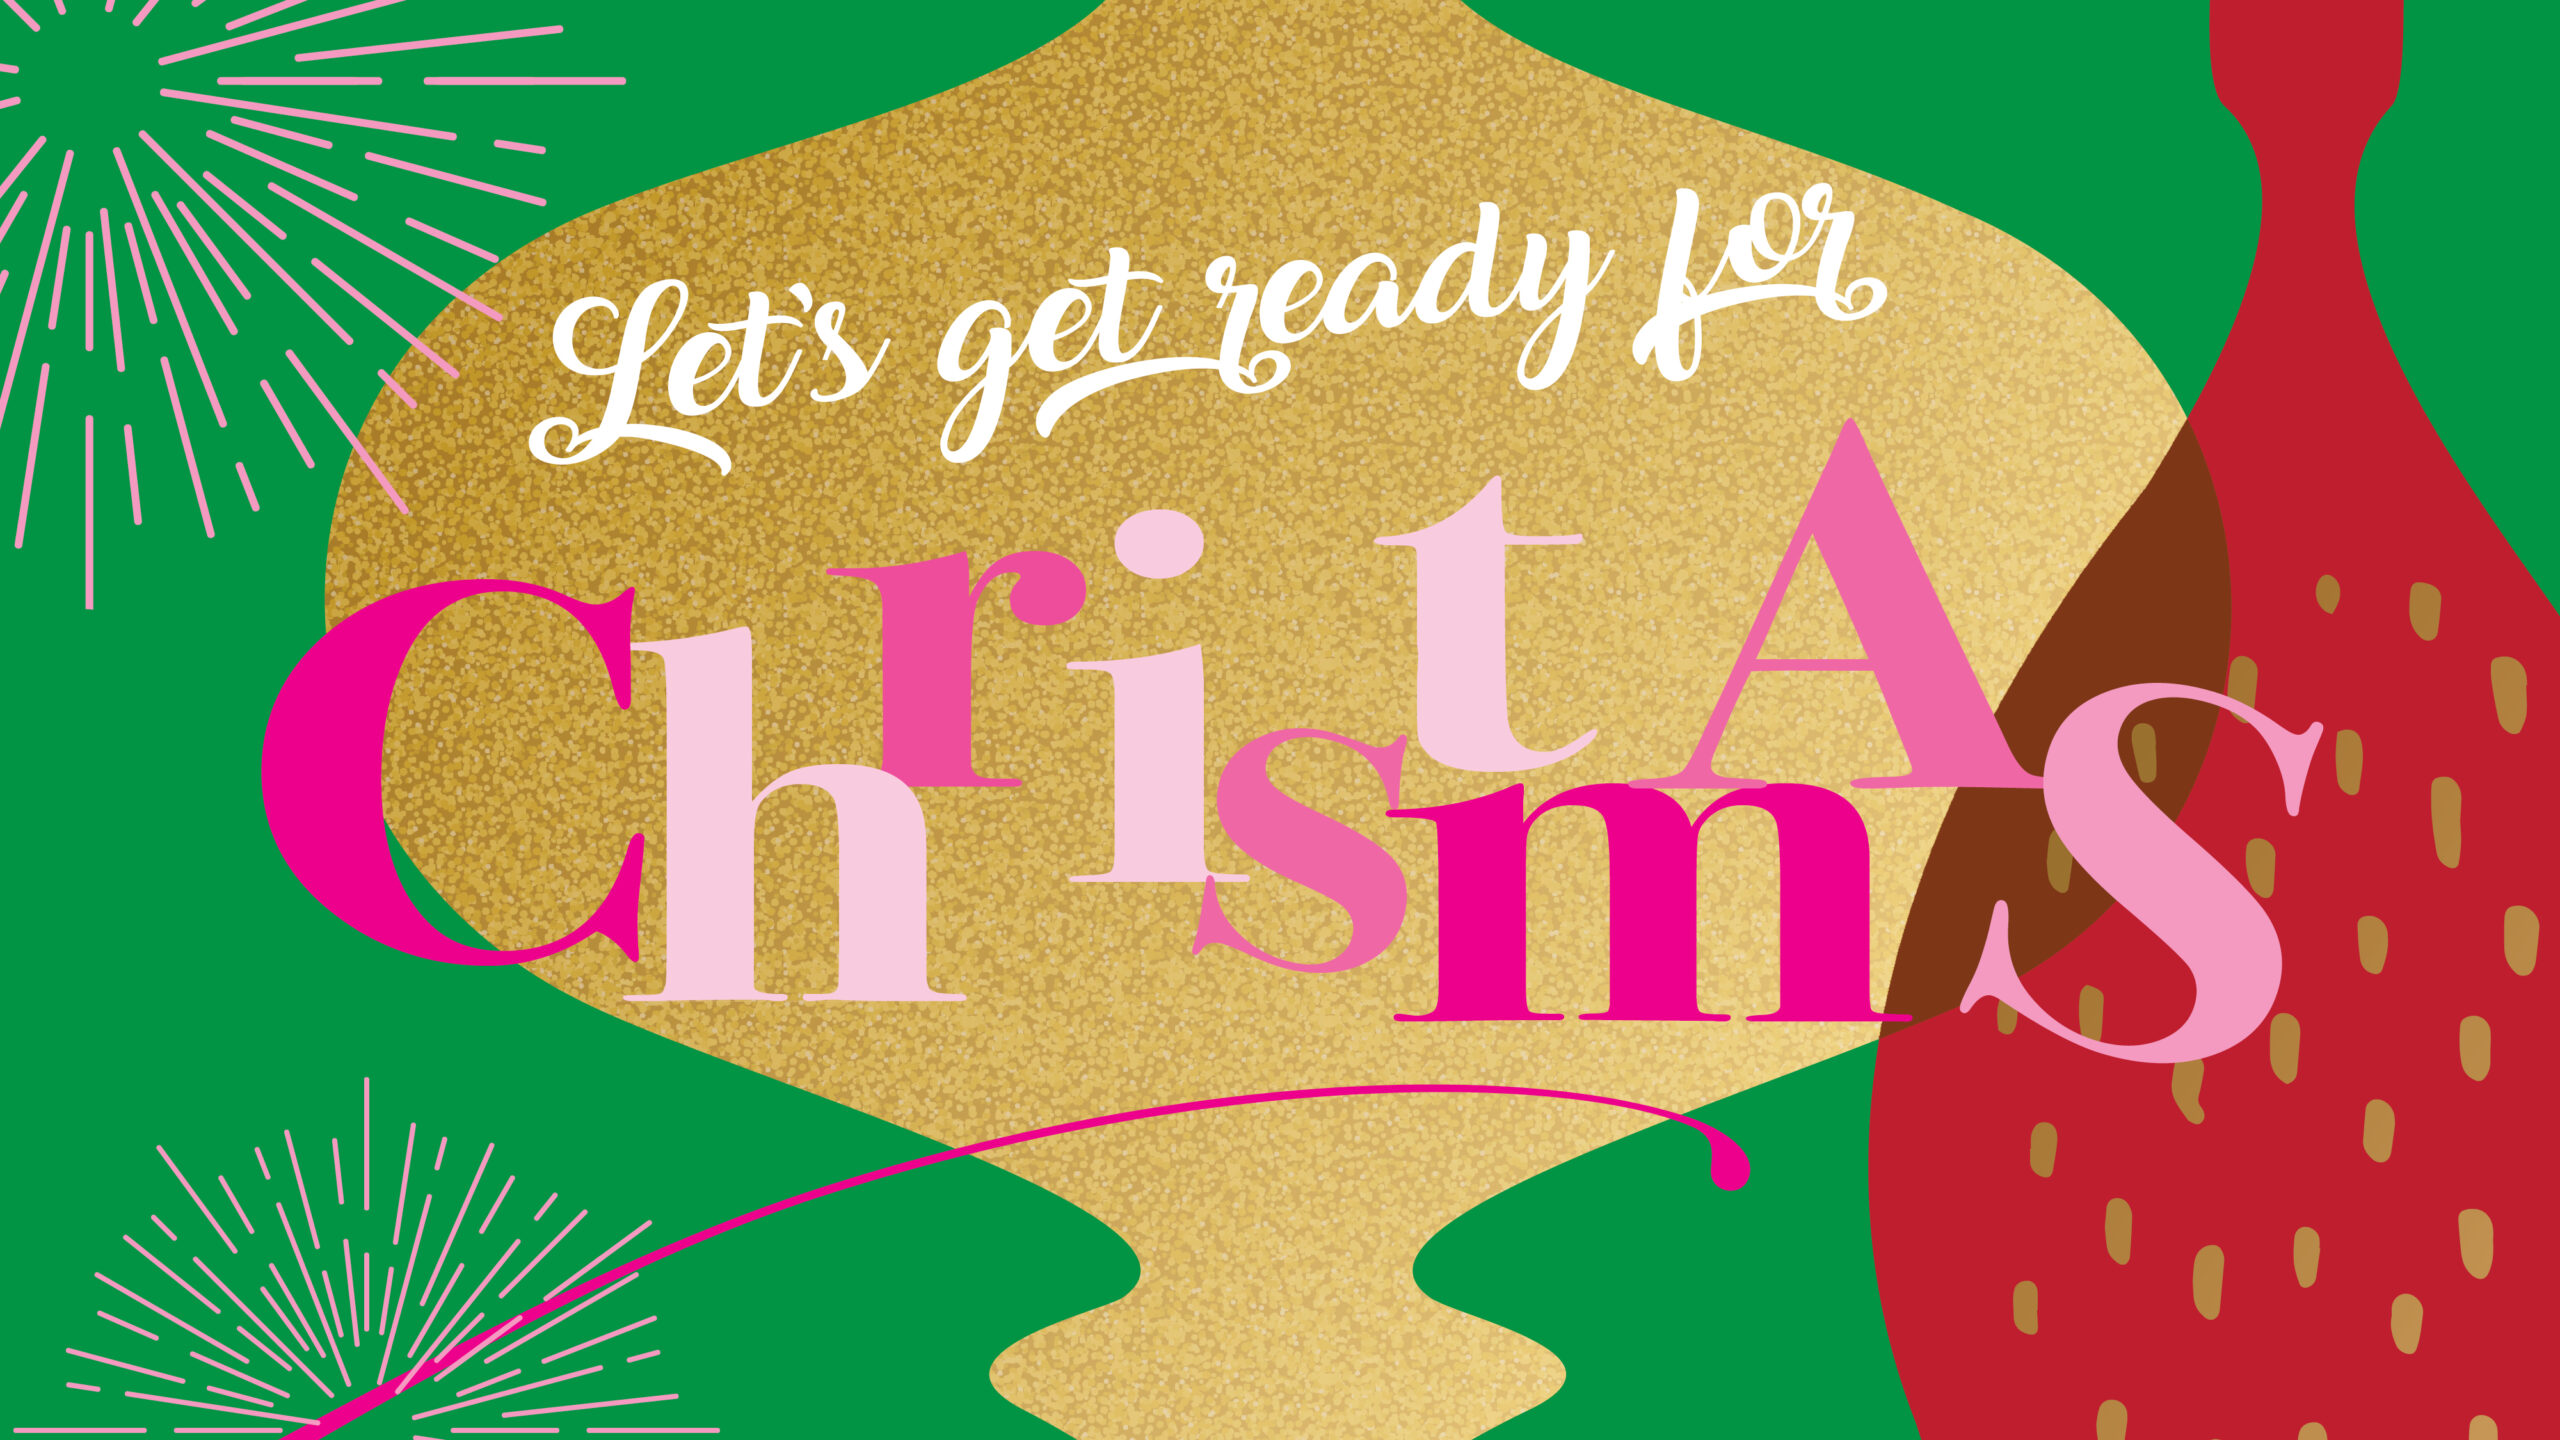 Let's Get Ready for Christmas - Girls Night Out Holiday Prep Event, November 12 at Peachtree Road United Methodist Church in Atlanta, GA.